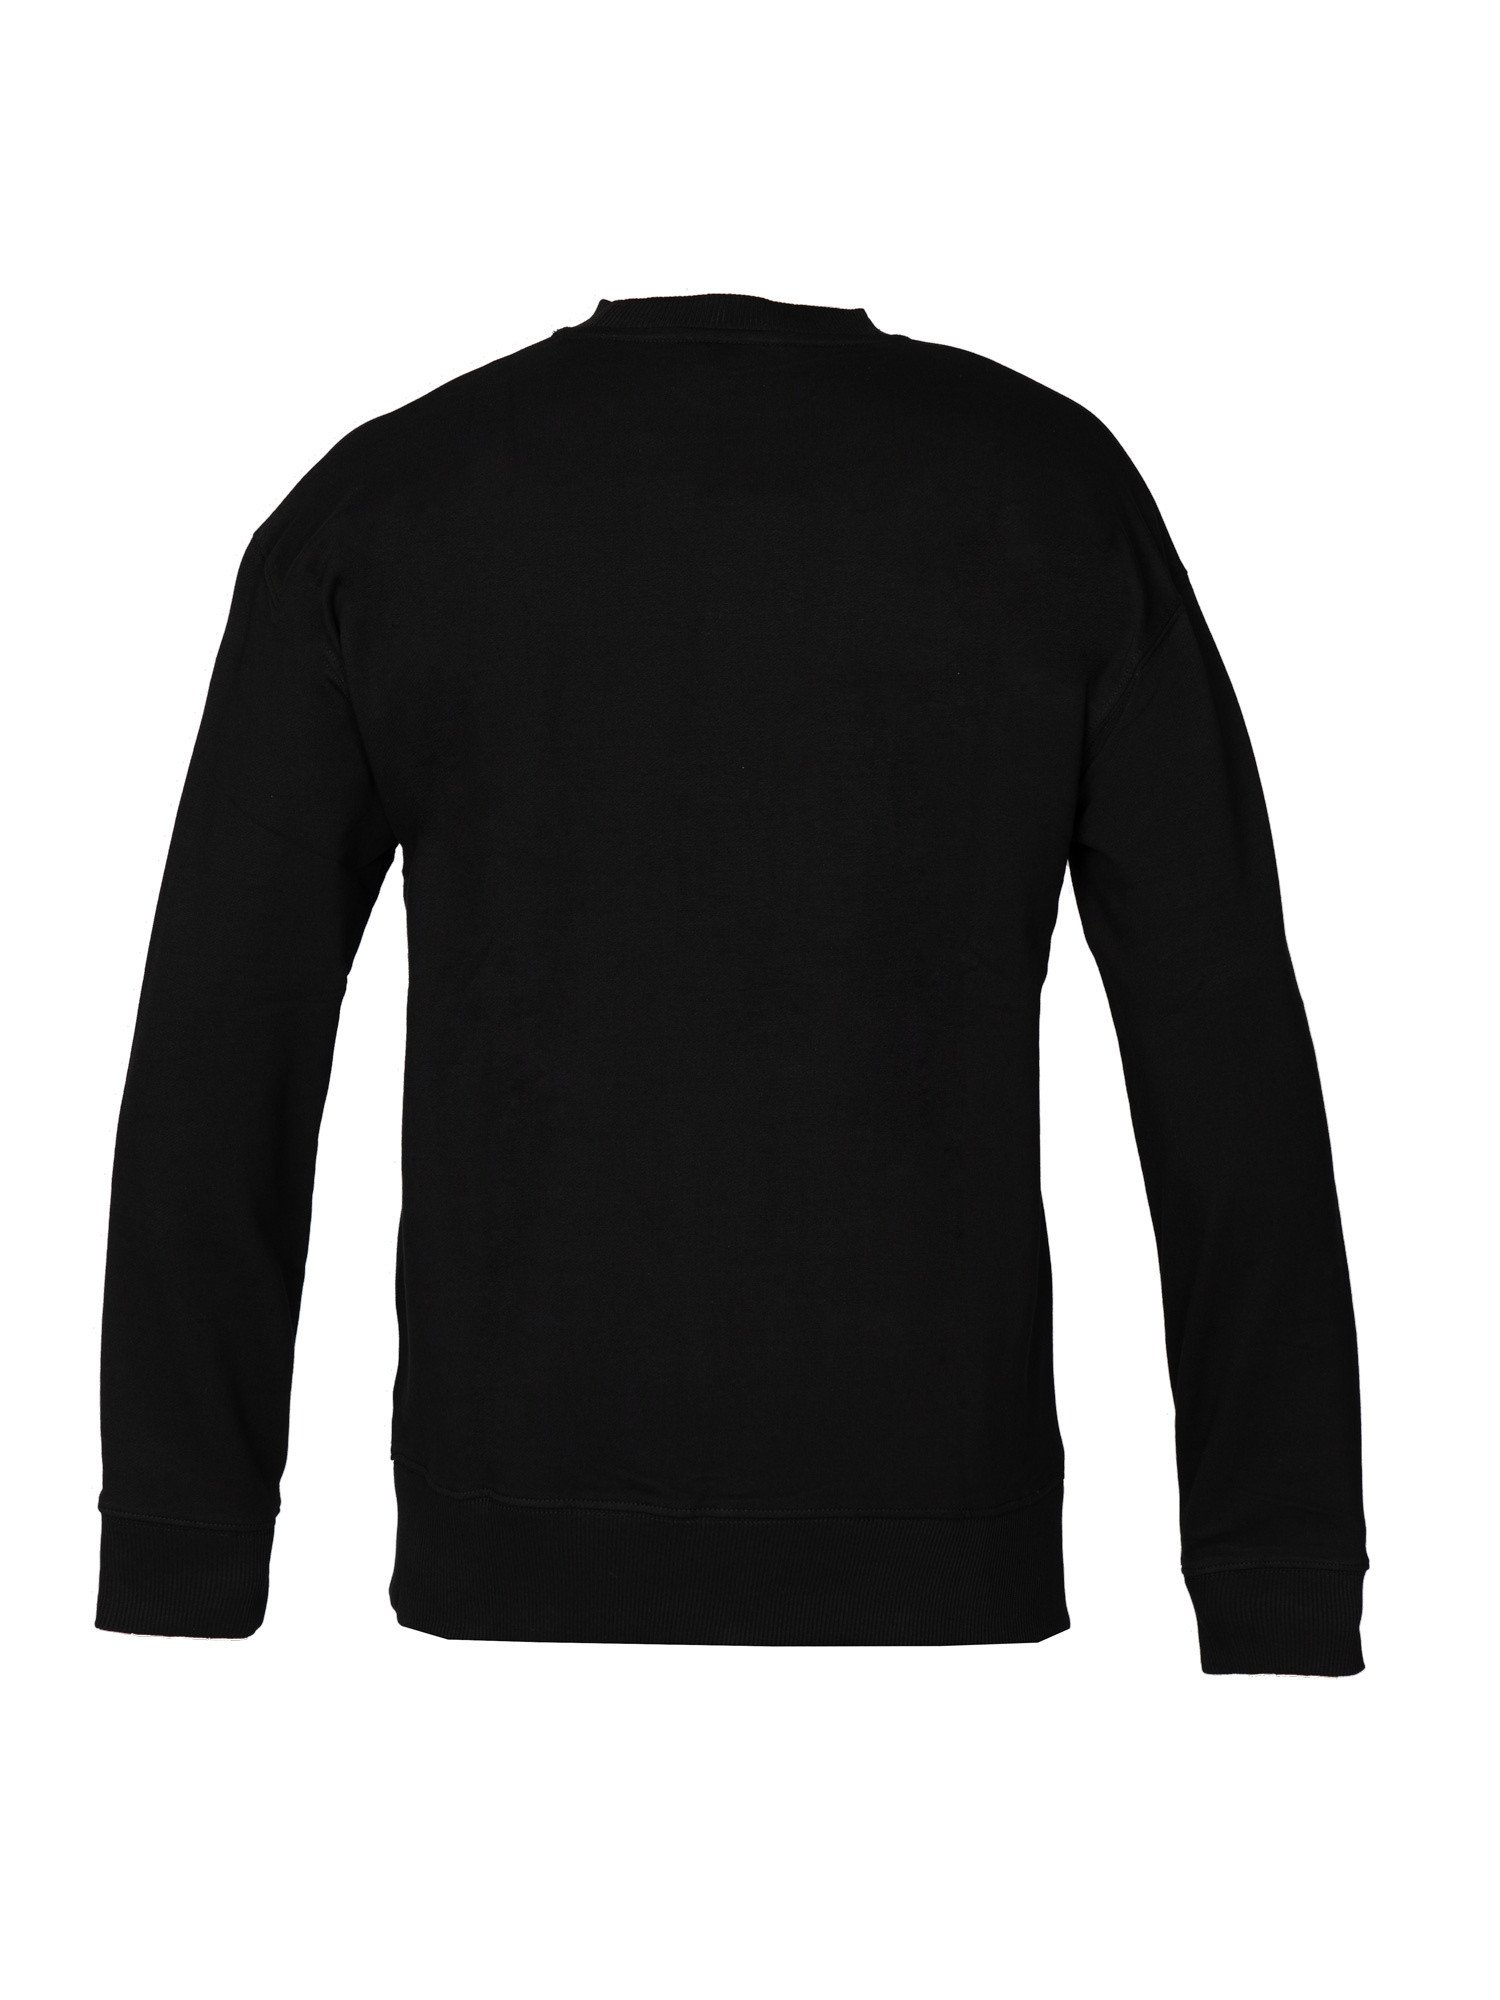 Project sweatshirt with embossed writing, Black, large image number 1